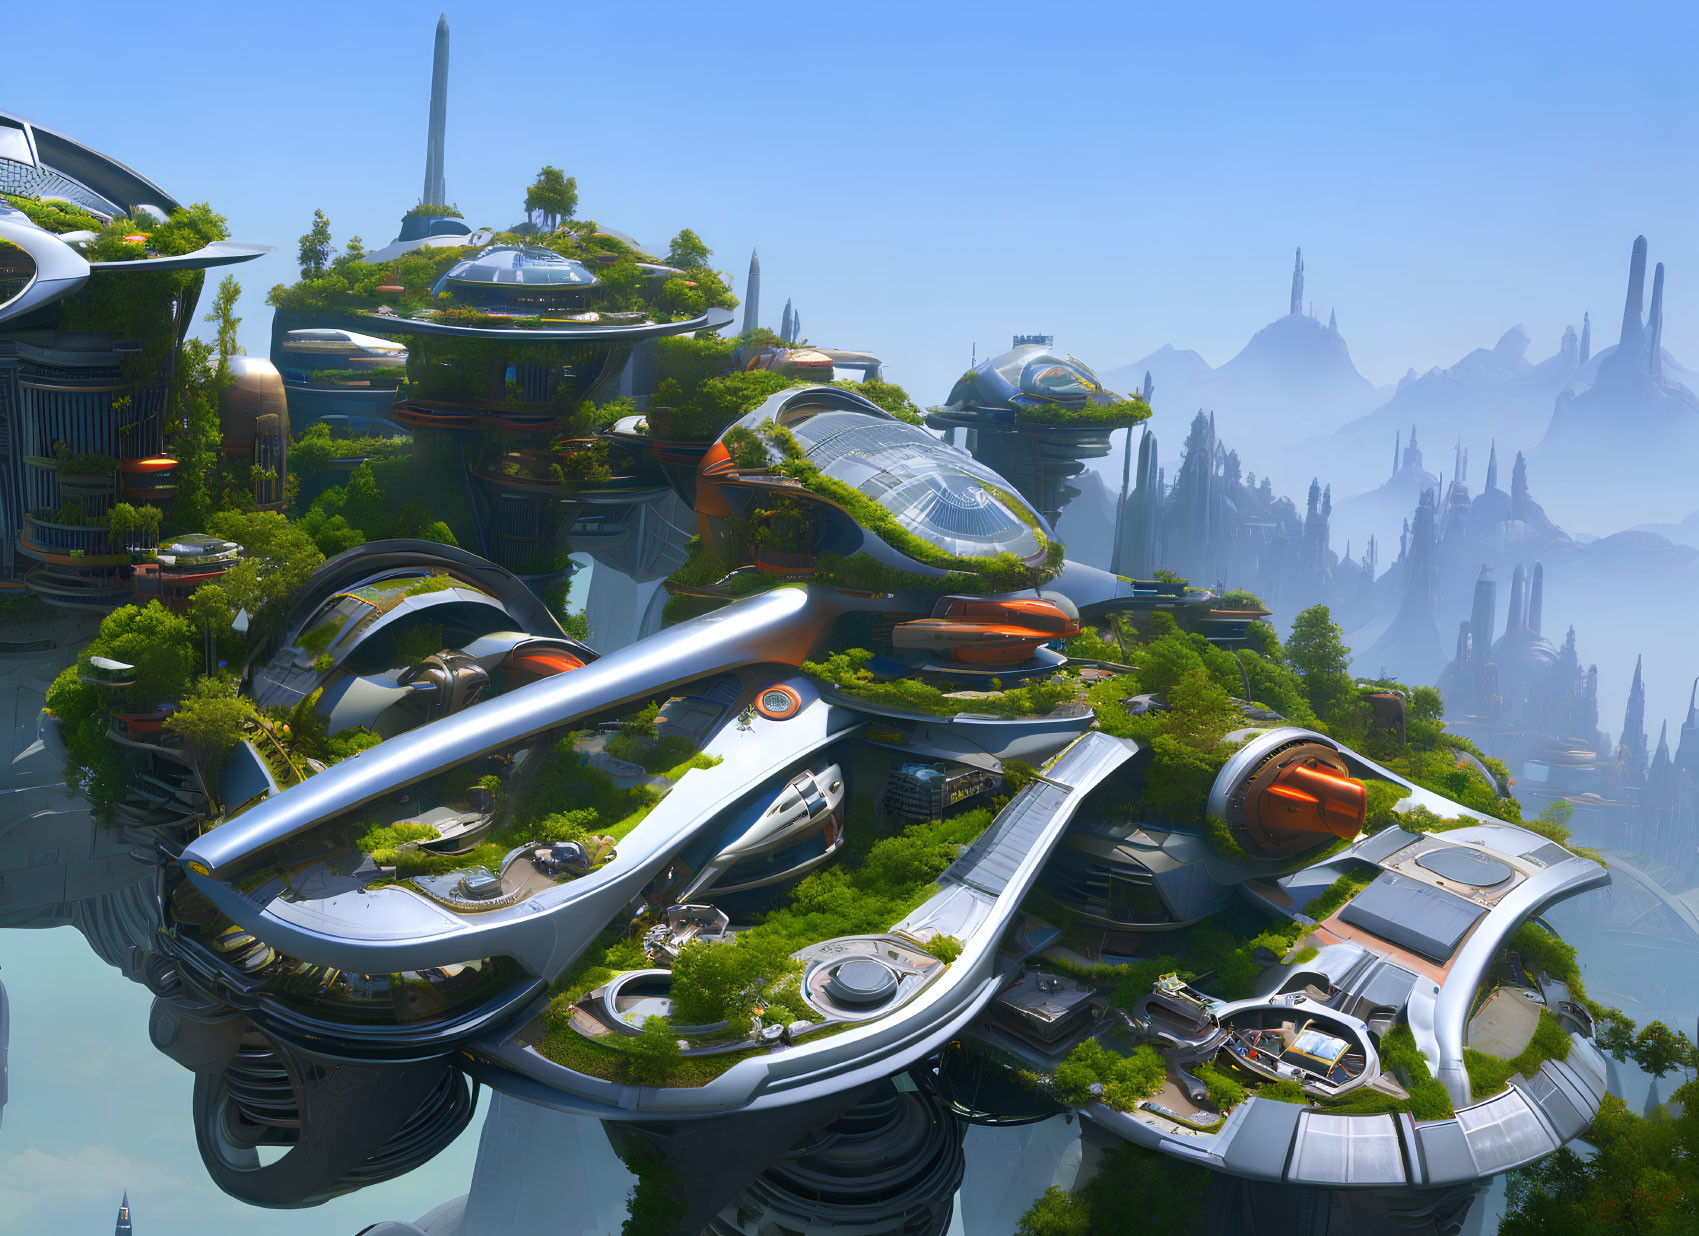 Futuristic city with domed buildings, greenery, mountains, and blue sky